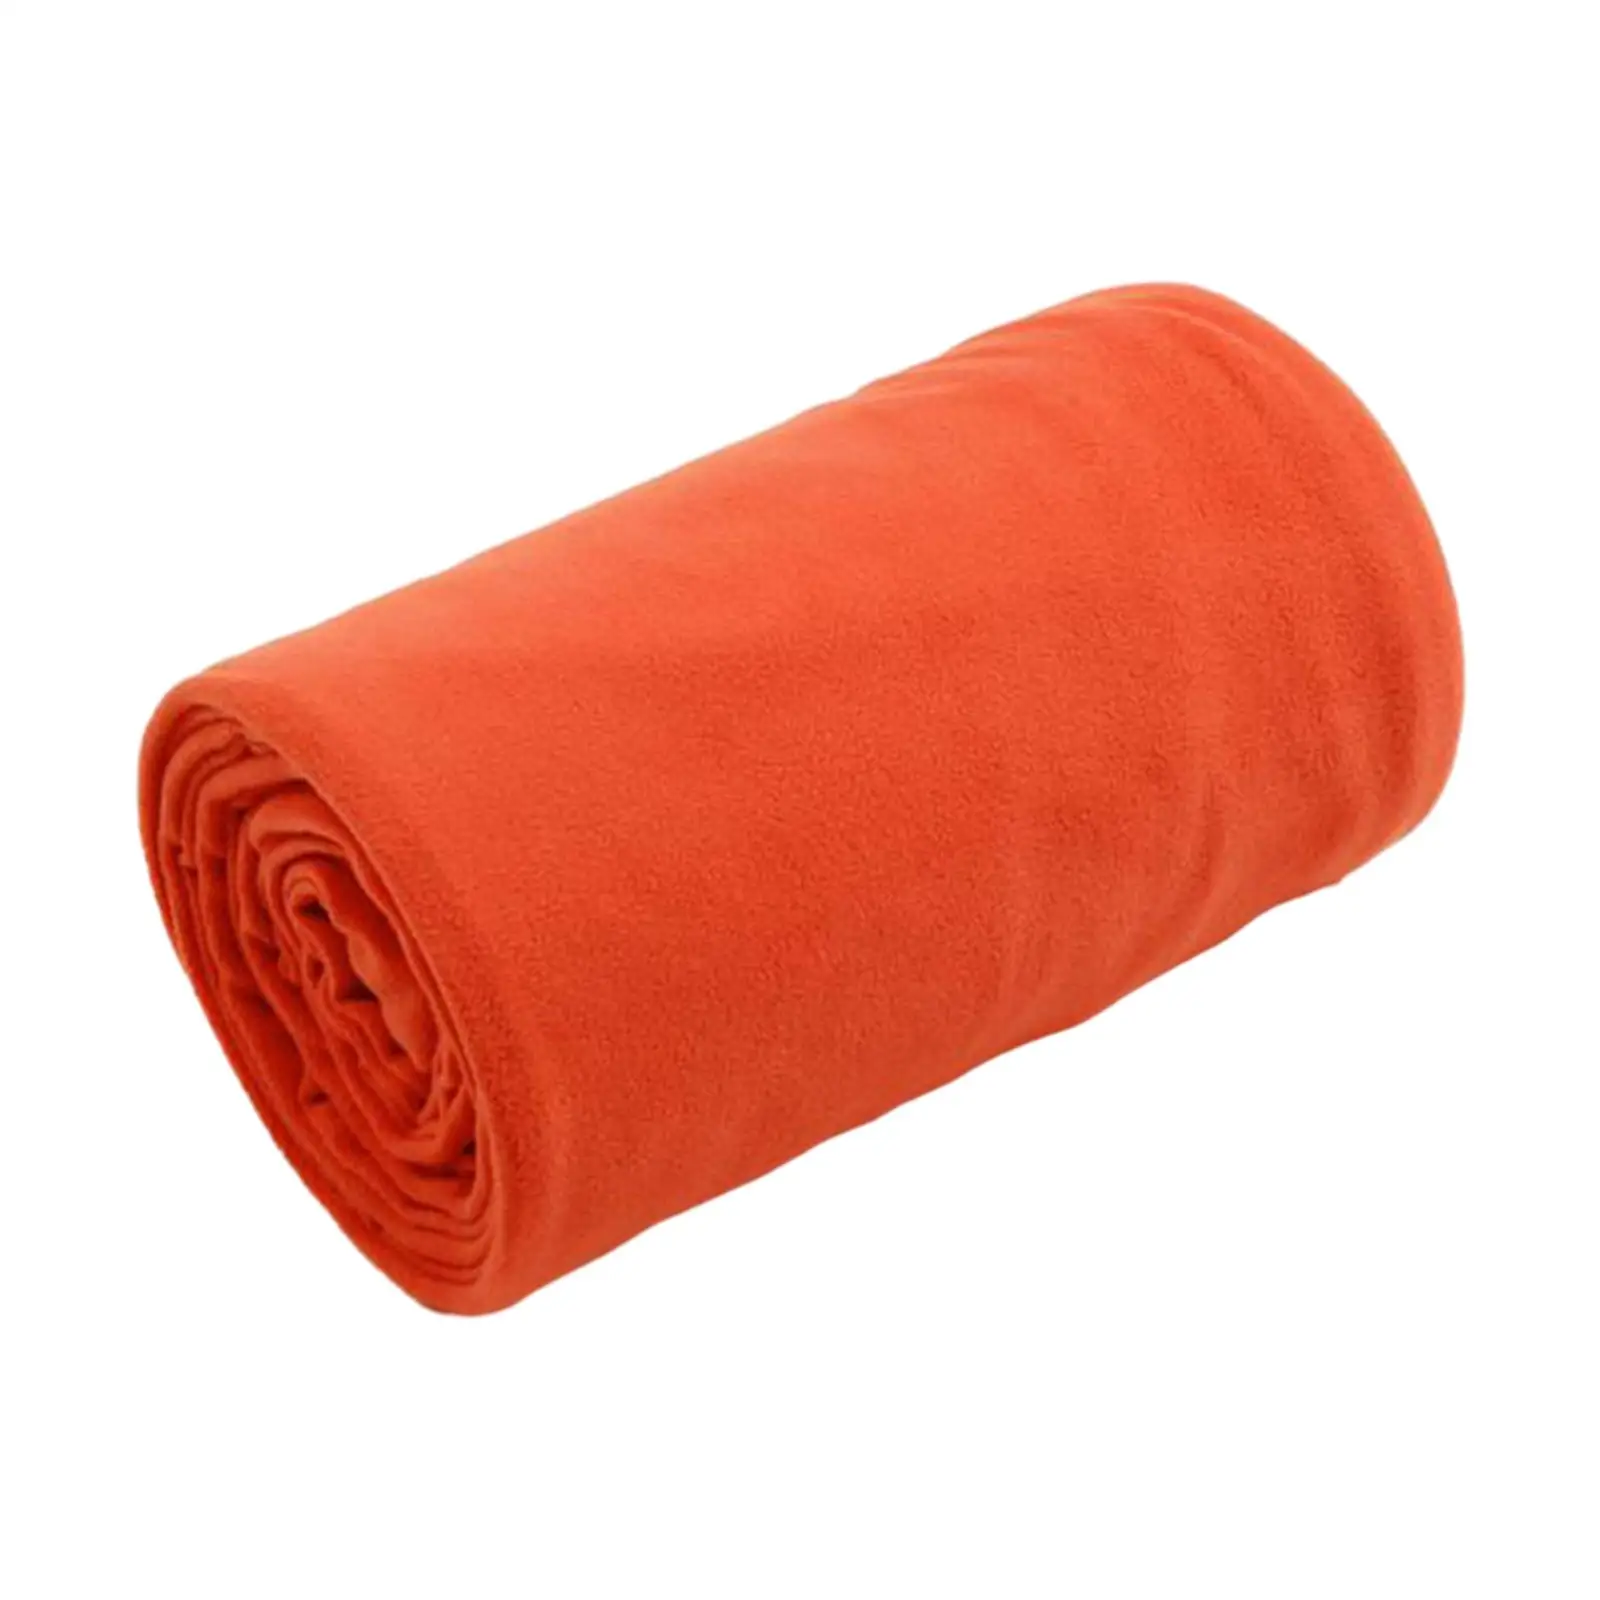 Fleece Sleeping Bag Liner Portable for Backpacking Hiking Mountaineering Thermal Thickness Camping Sport Accessories